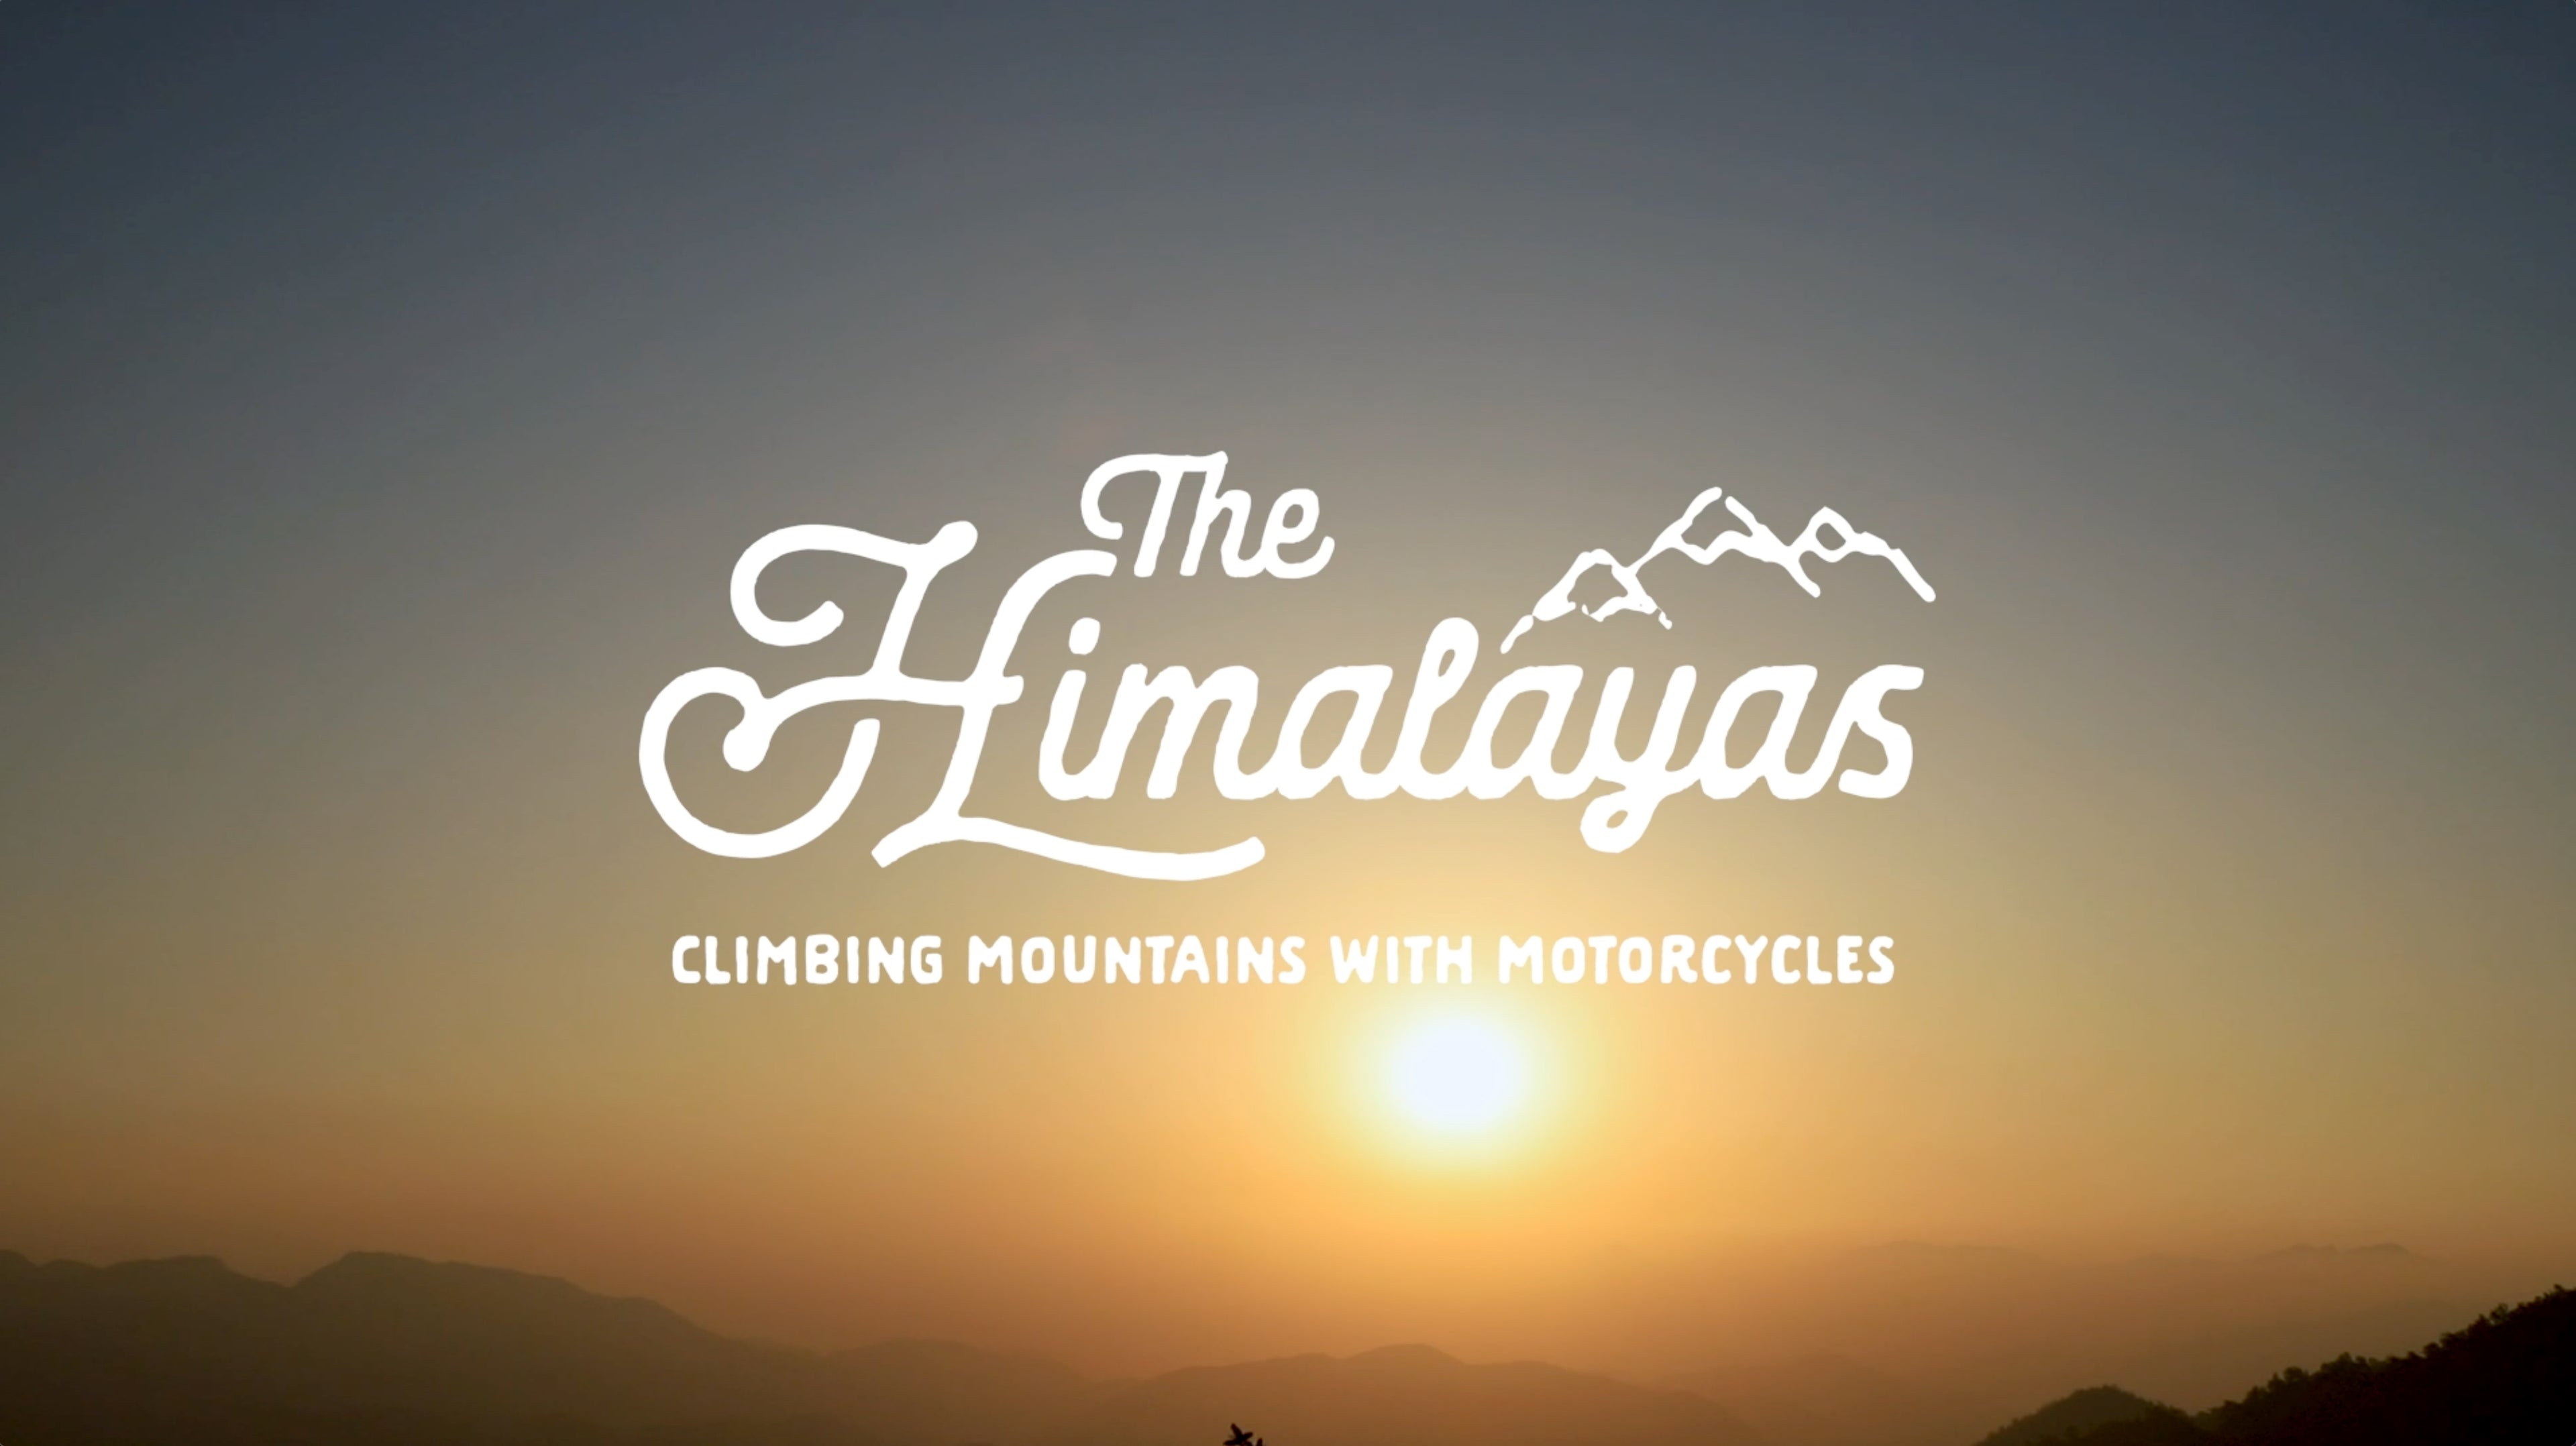 Load video: The Himalayas - Climbing Mountains with Motorcycles